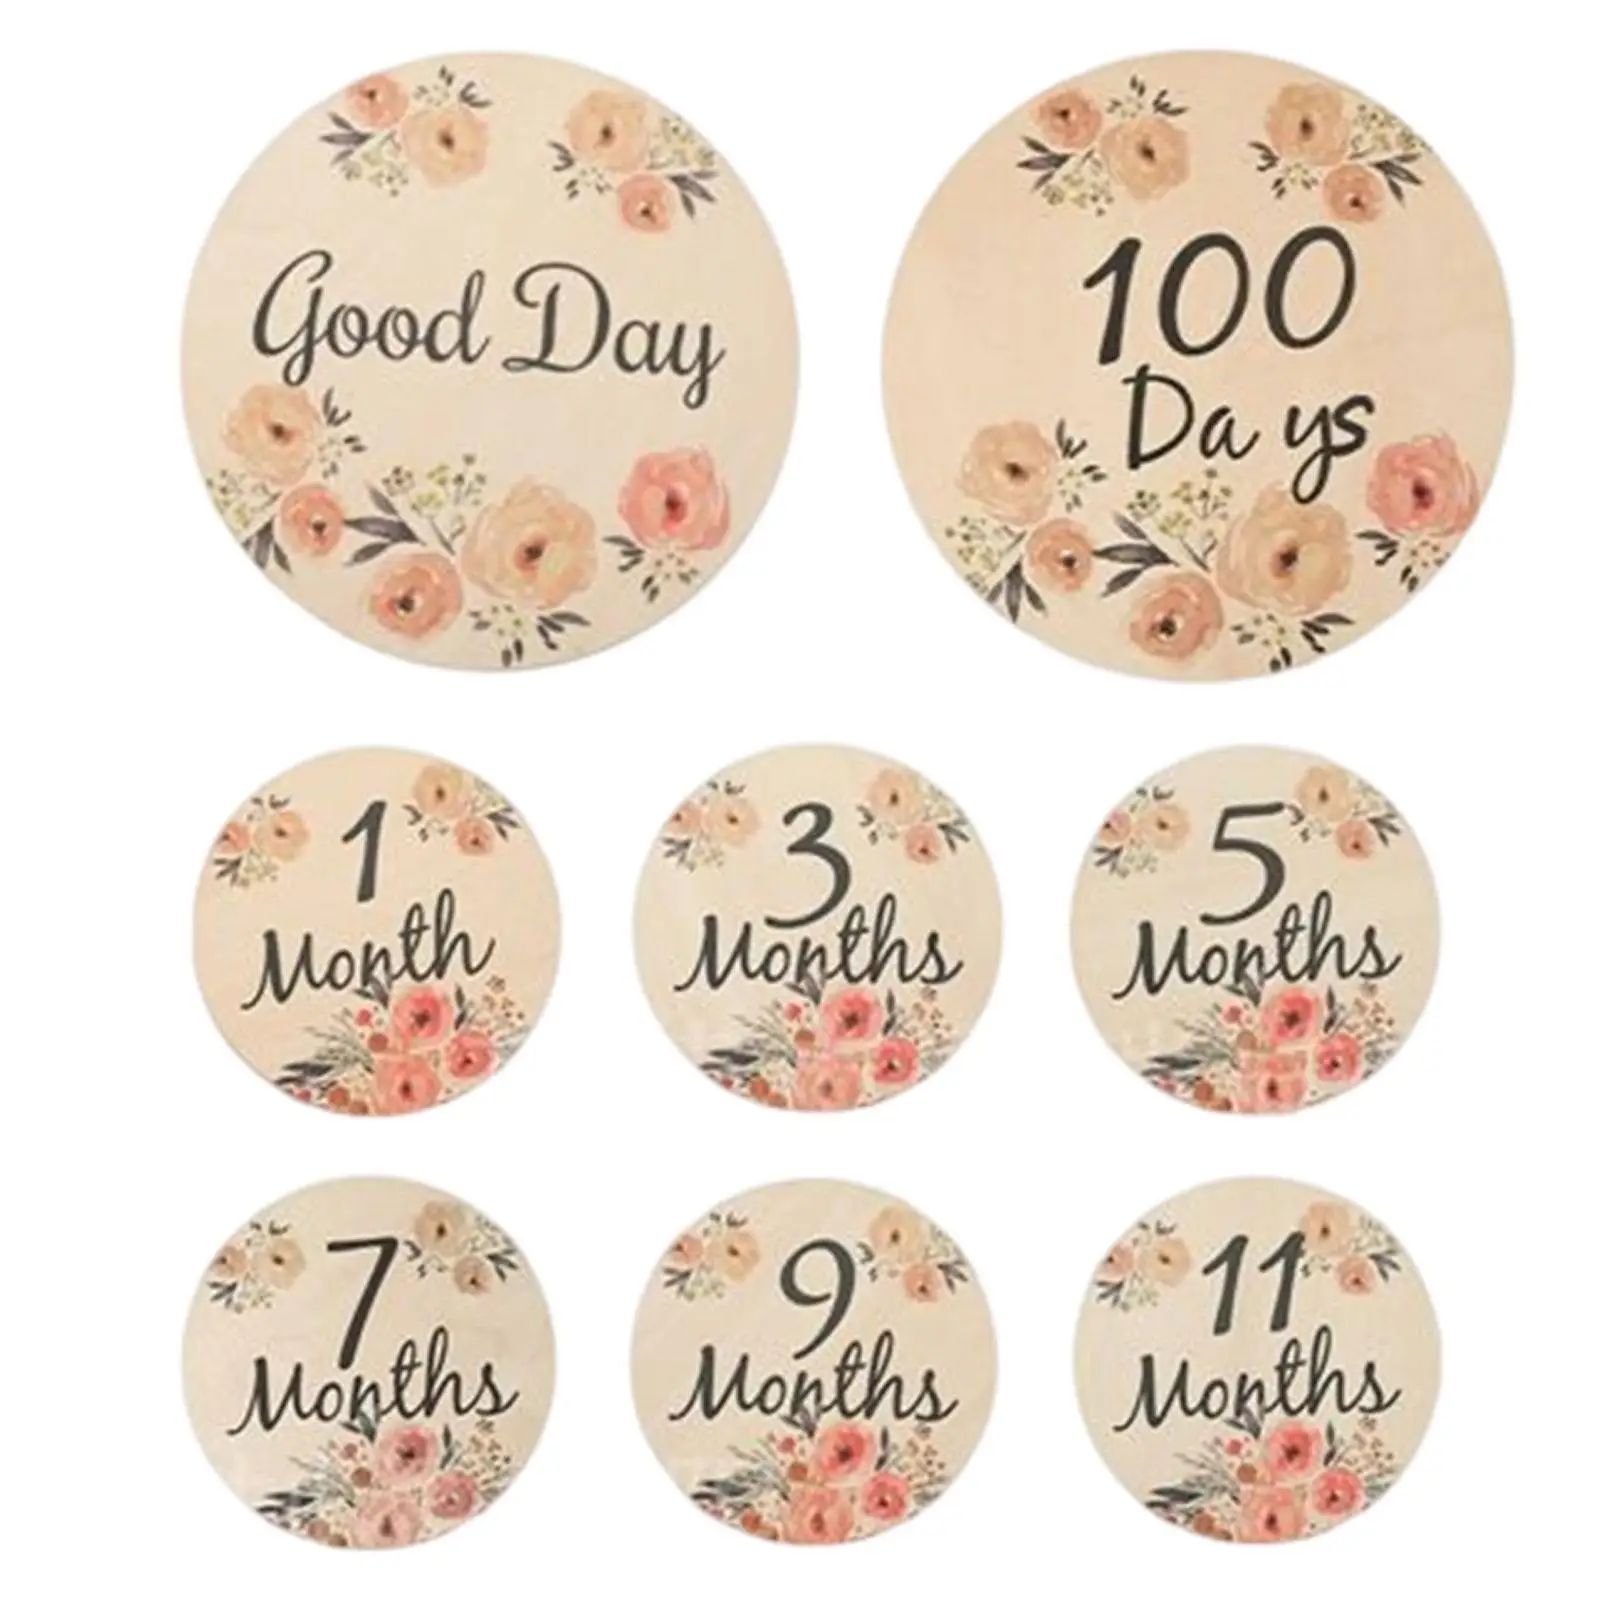 Wooden Baby Milestone Cards Newborn Photoshoot Props Engraved Discs Gifts